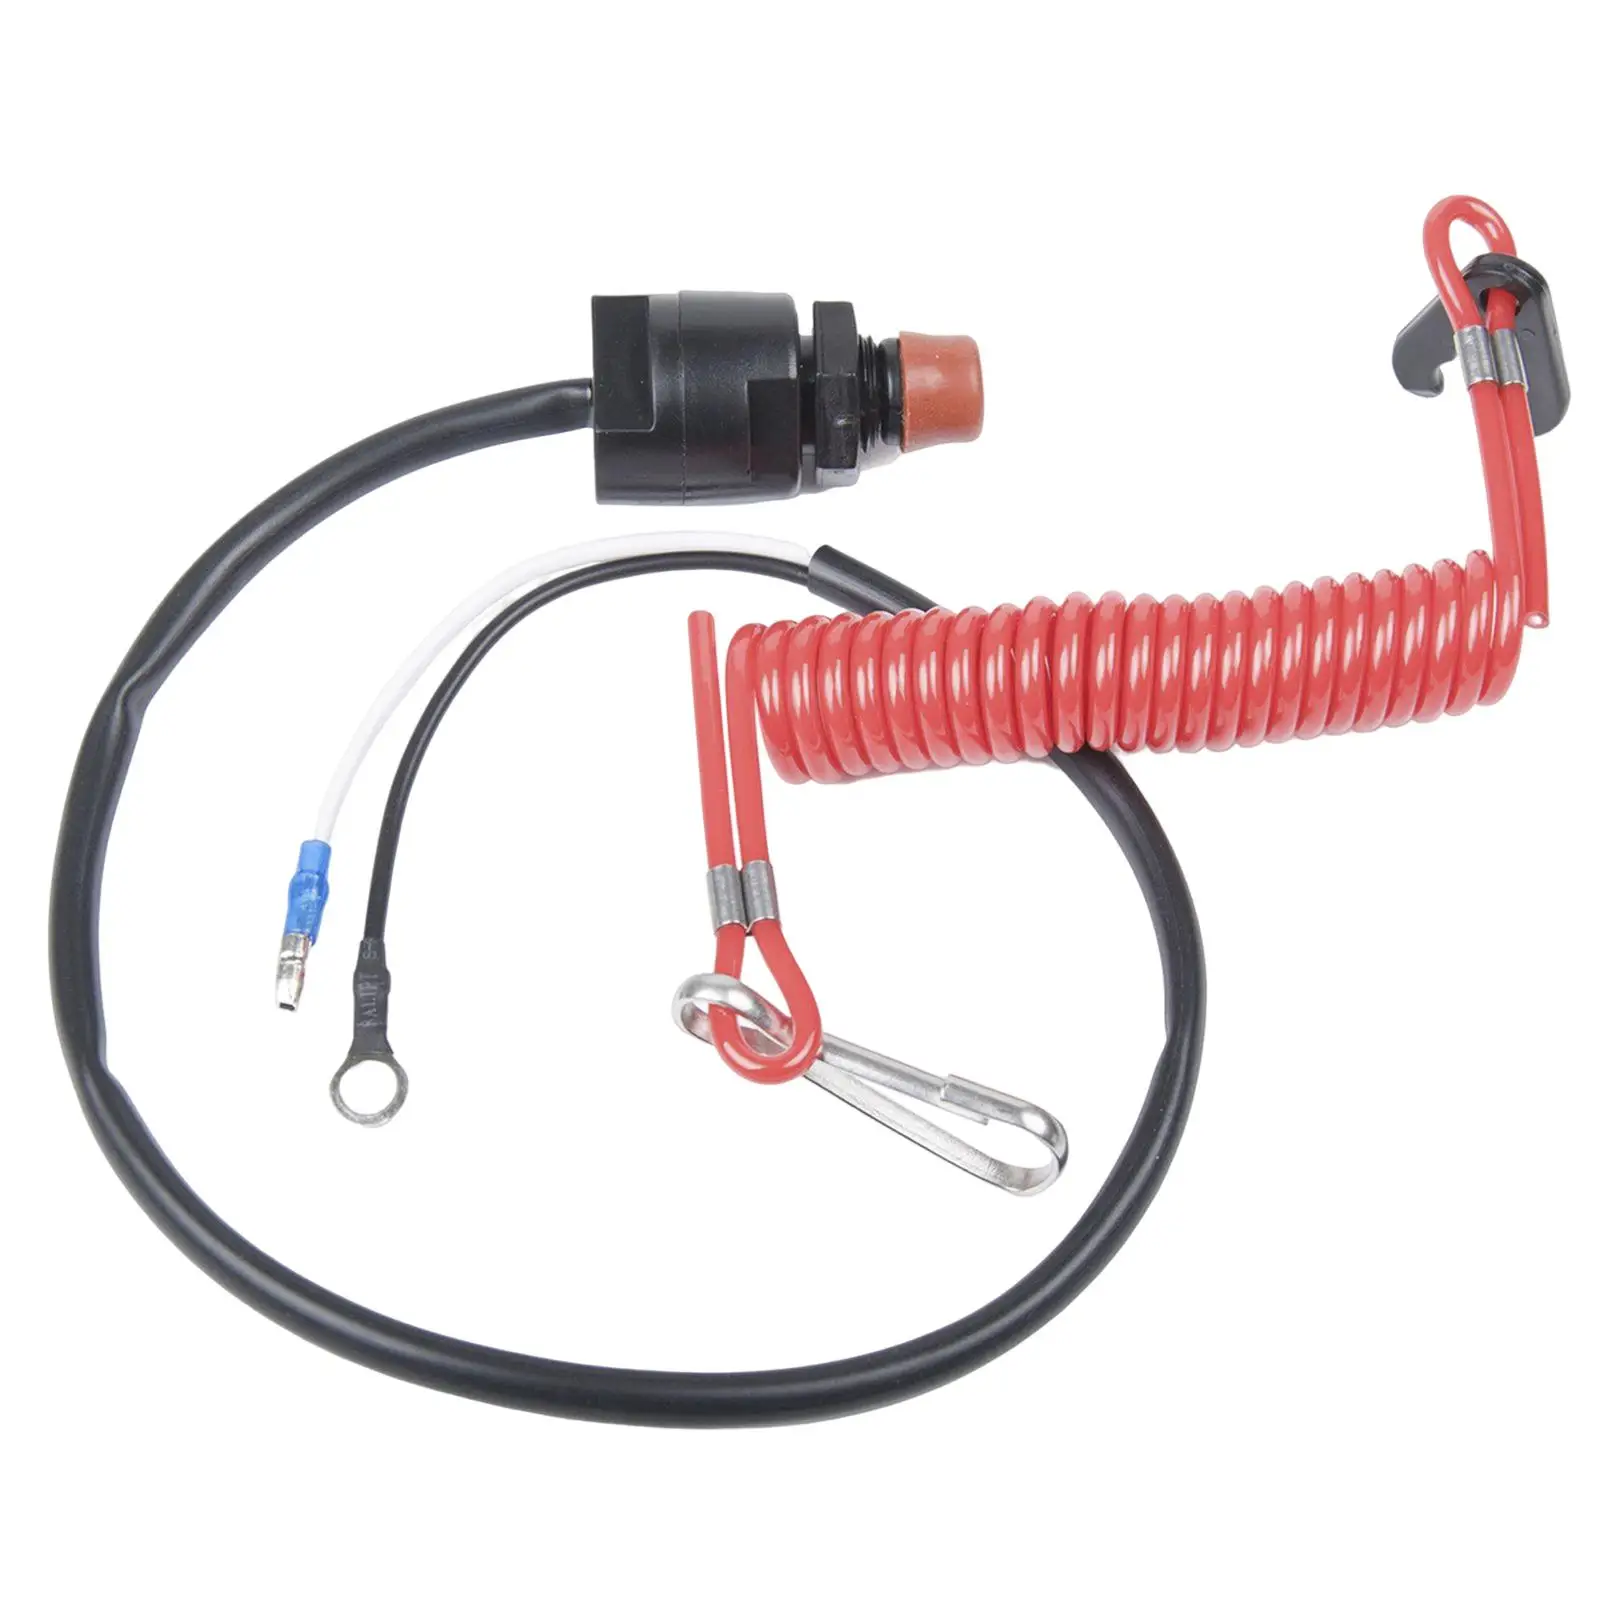 Flameout Switch Ignition Rope  Engine Stop Kill Switch for Motorboat